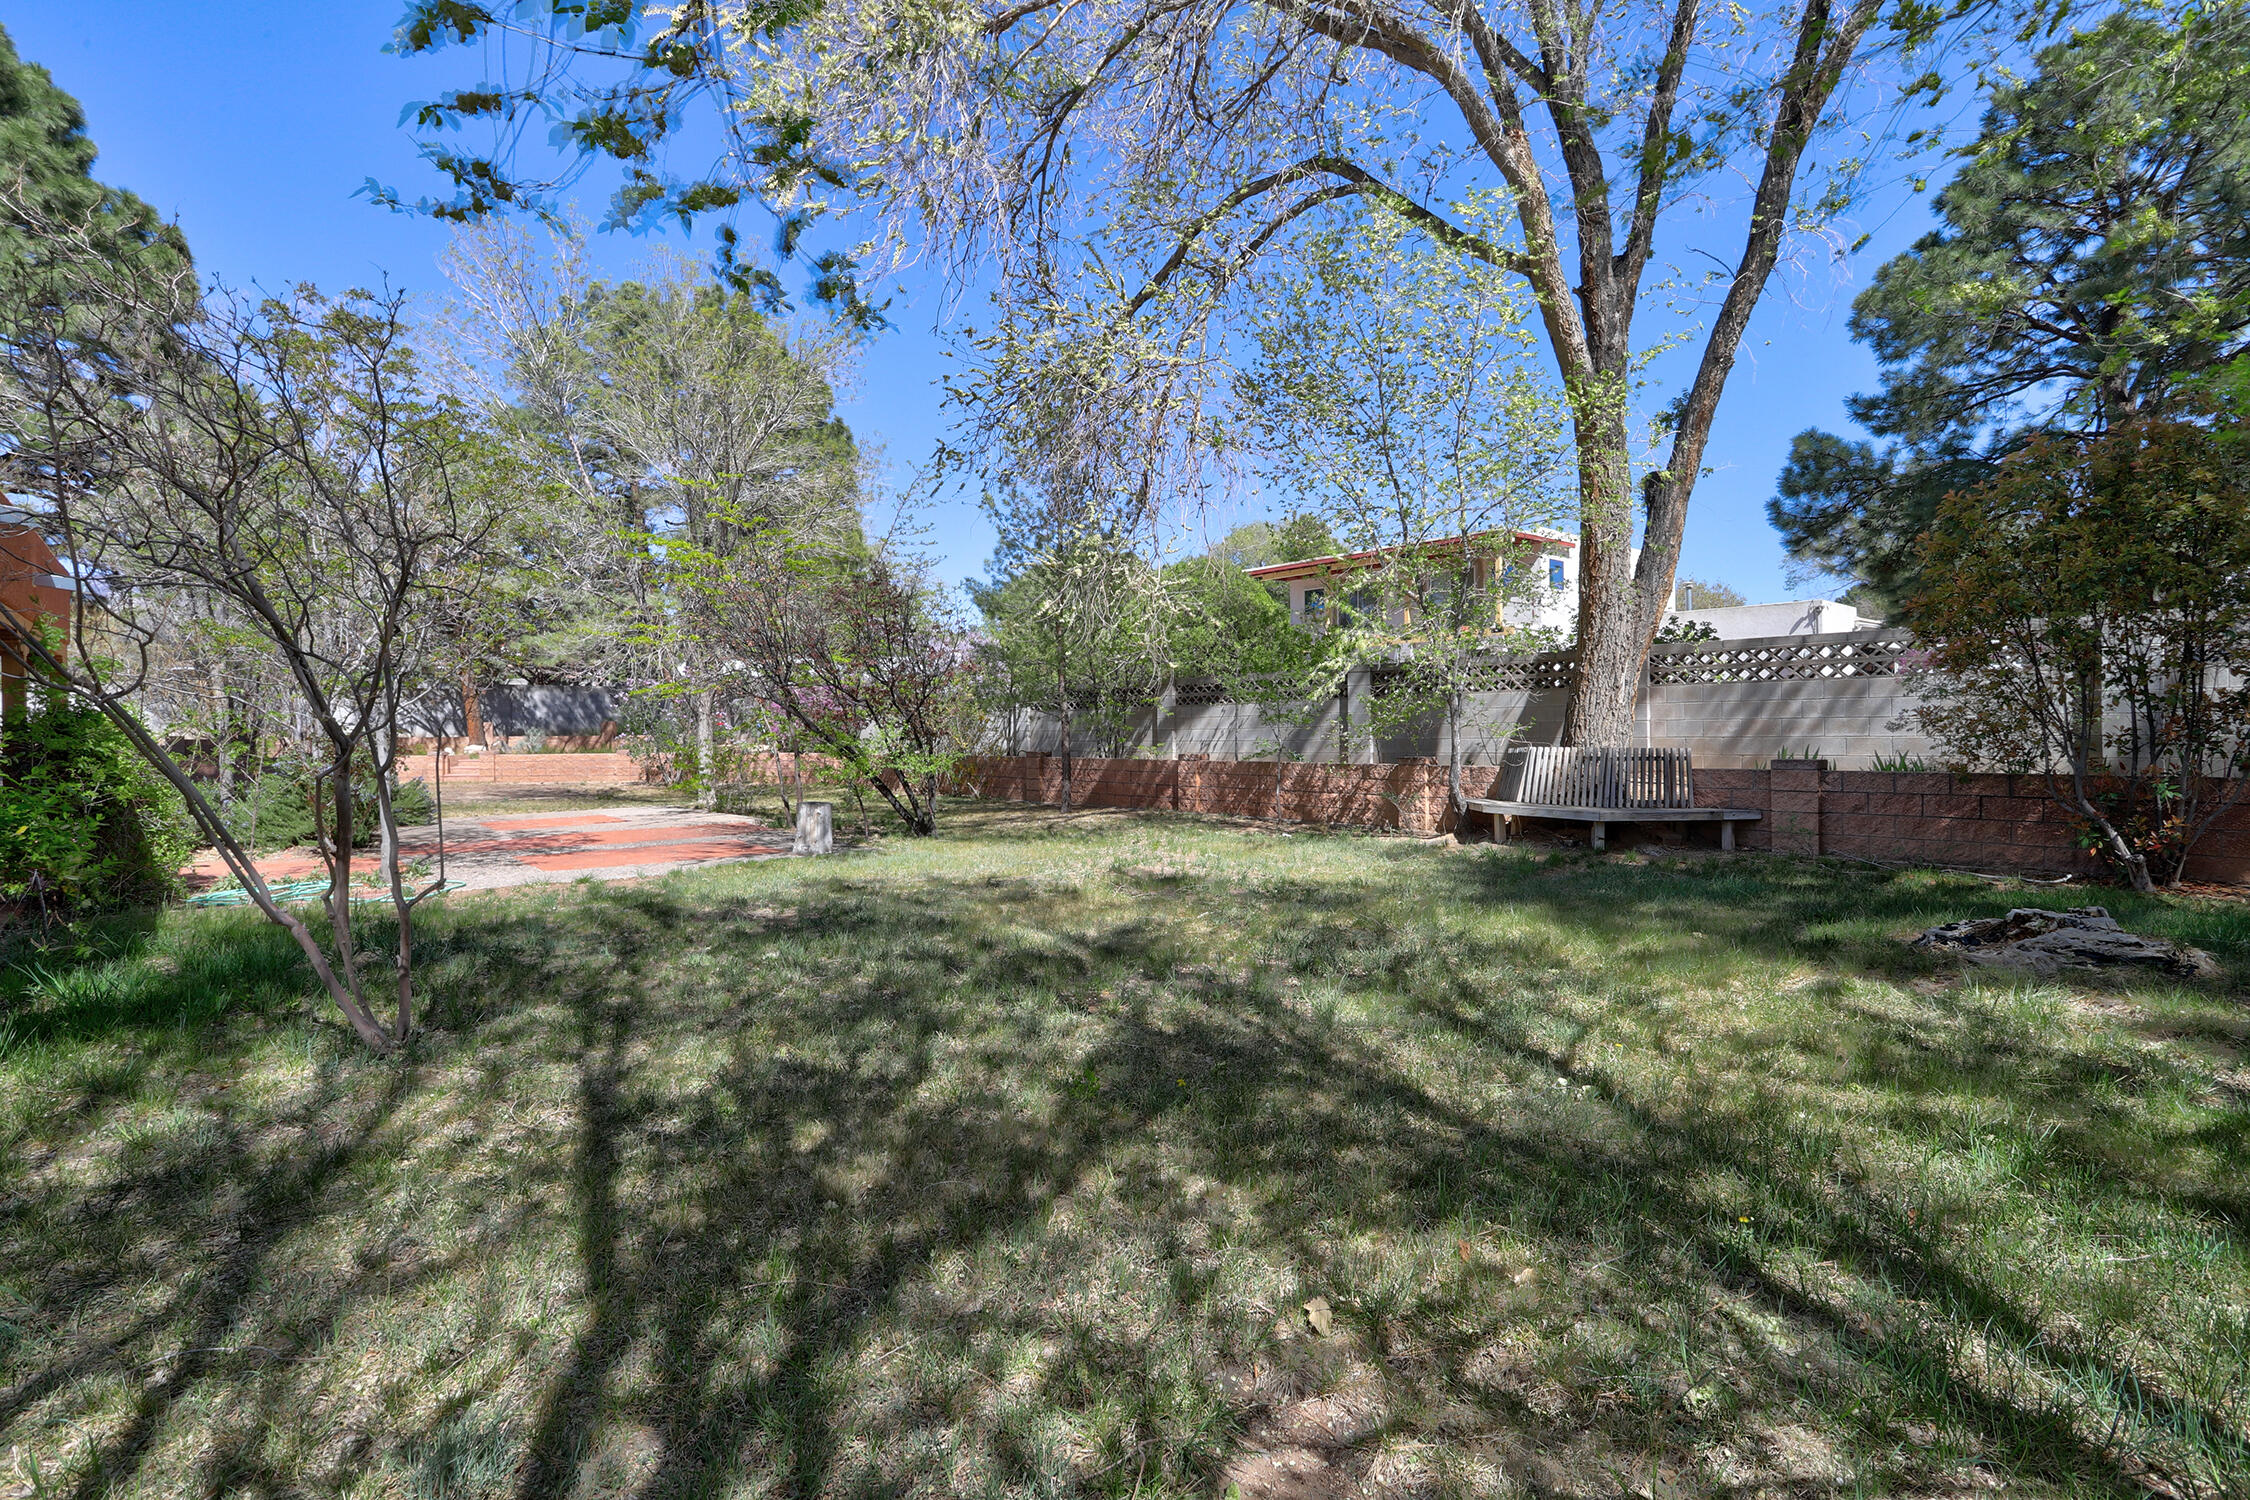 1020 Brazos Place SE, Albuquerque, New Mexico 87123, 5 Bedrooms Bedrooms, ,3 BathroomsBathrooms,Residential,For Sale,1020 Brazos Place SE,1060149